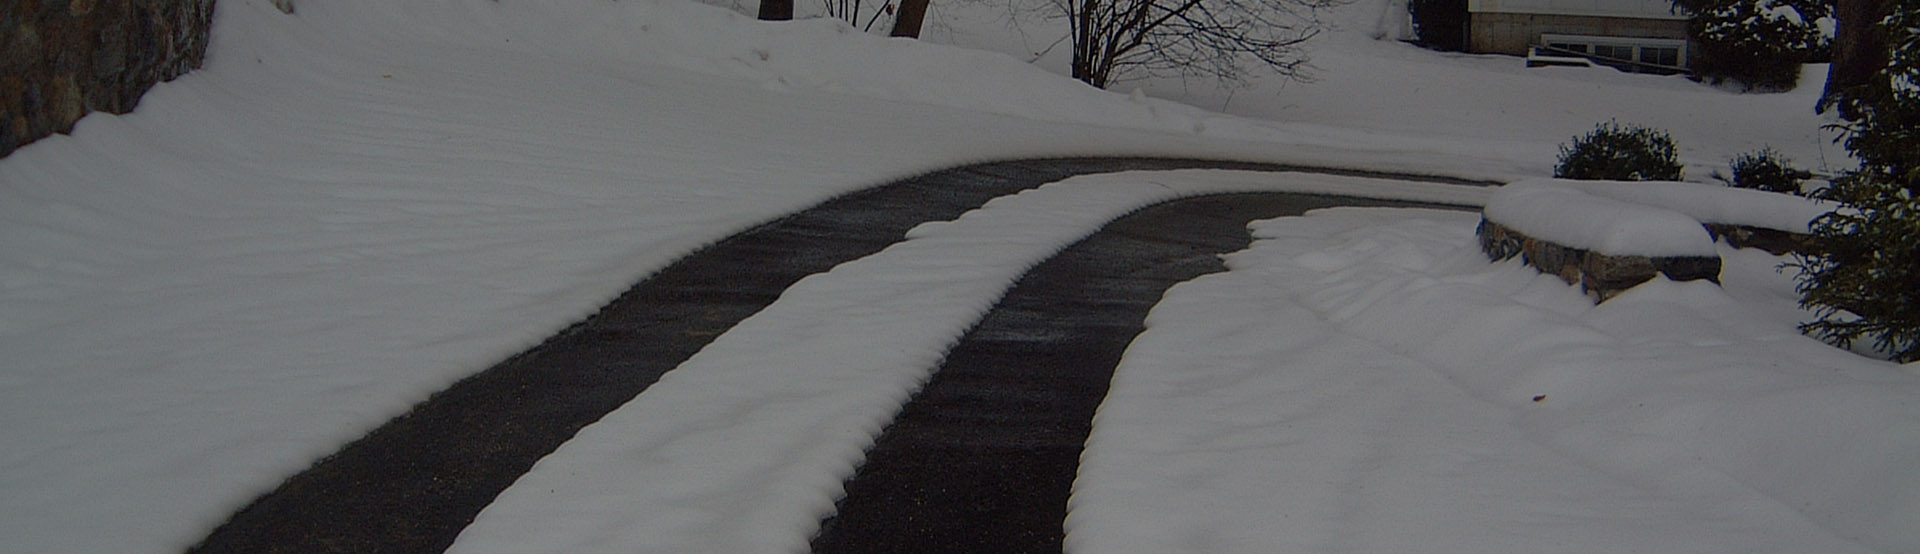 Heated driveway with tire track snow melting system and controls banner